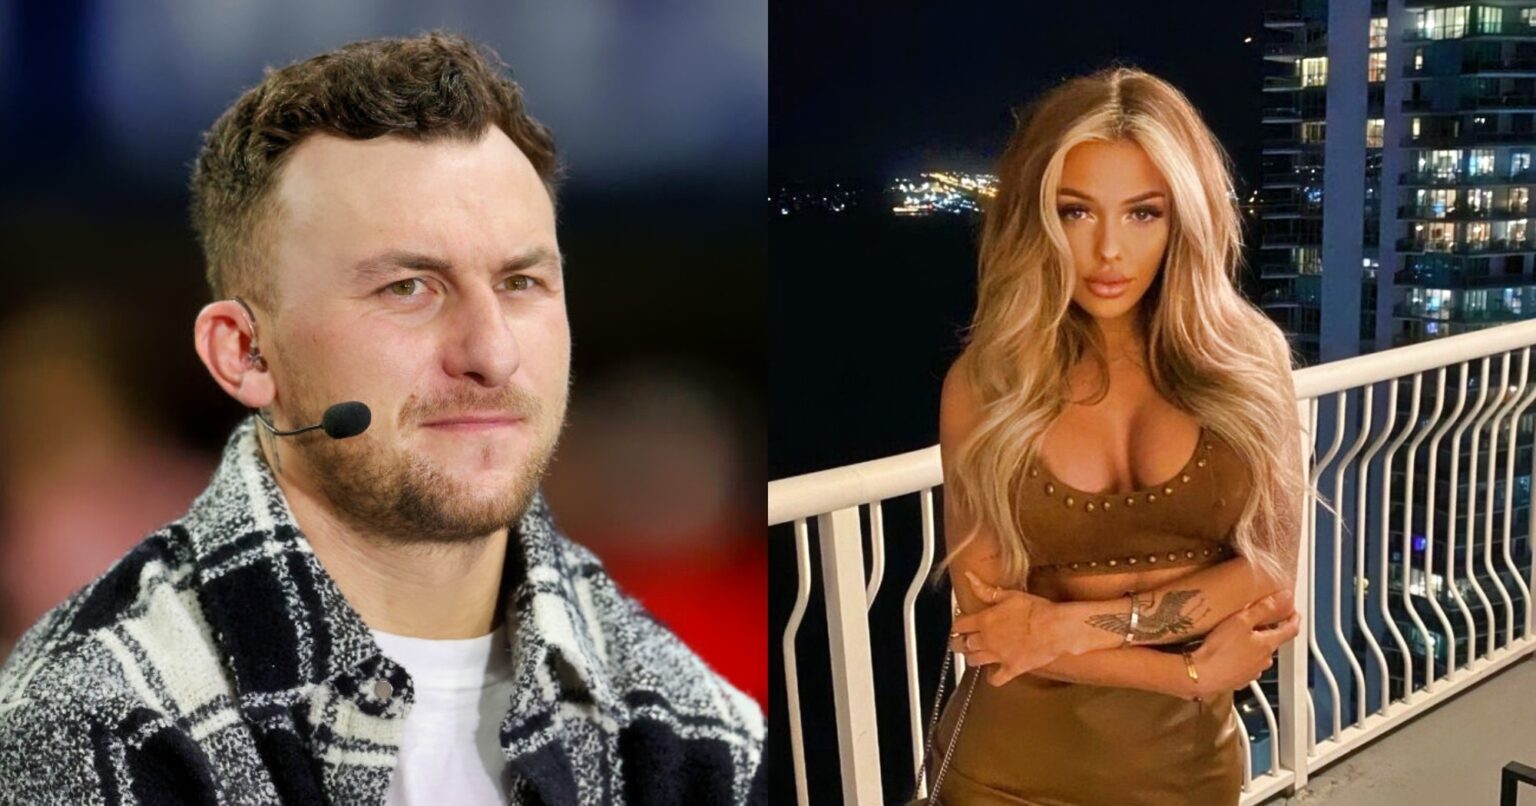 Johnny Manziel's Girlfriend Shares Racy Outfit Photo On Instagram